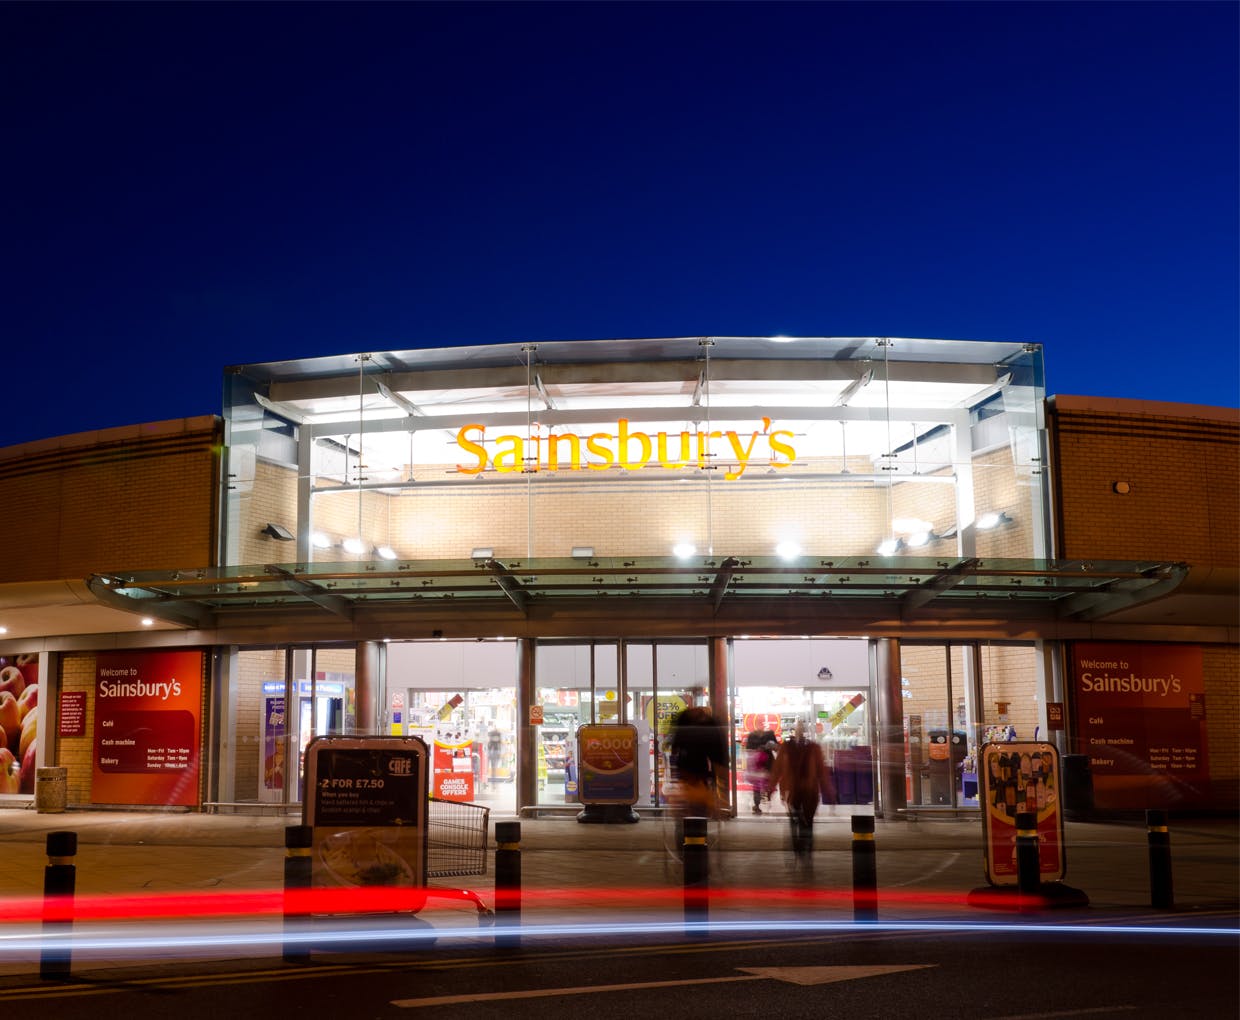 Sainsbury's sees opportunities in consolidation despite failed Asda merger